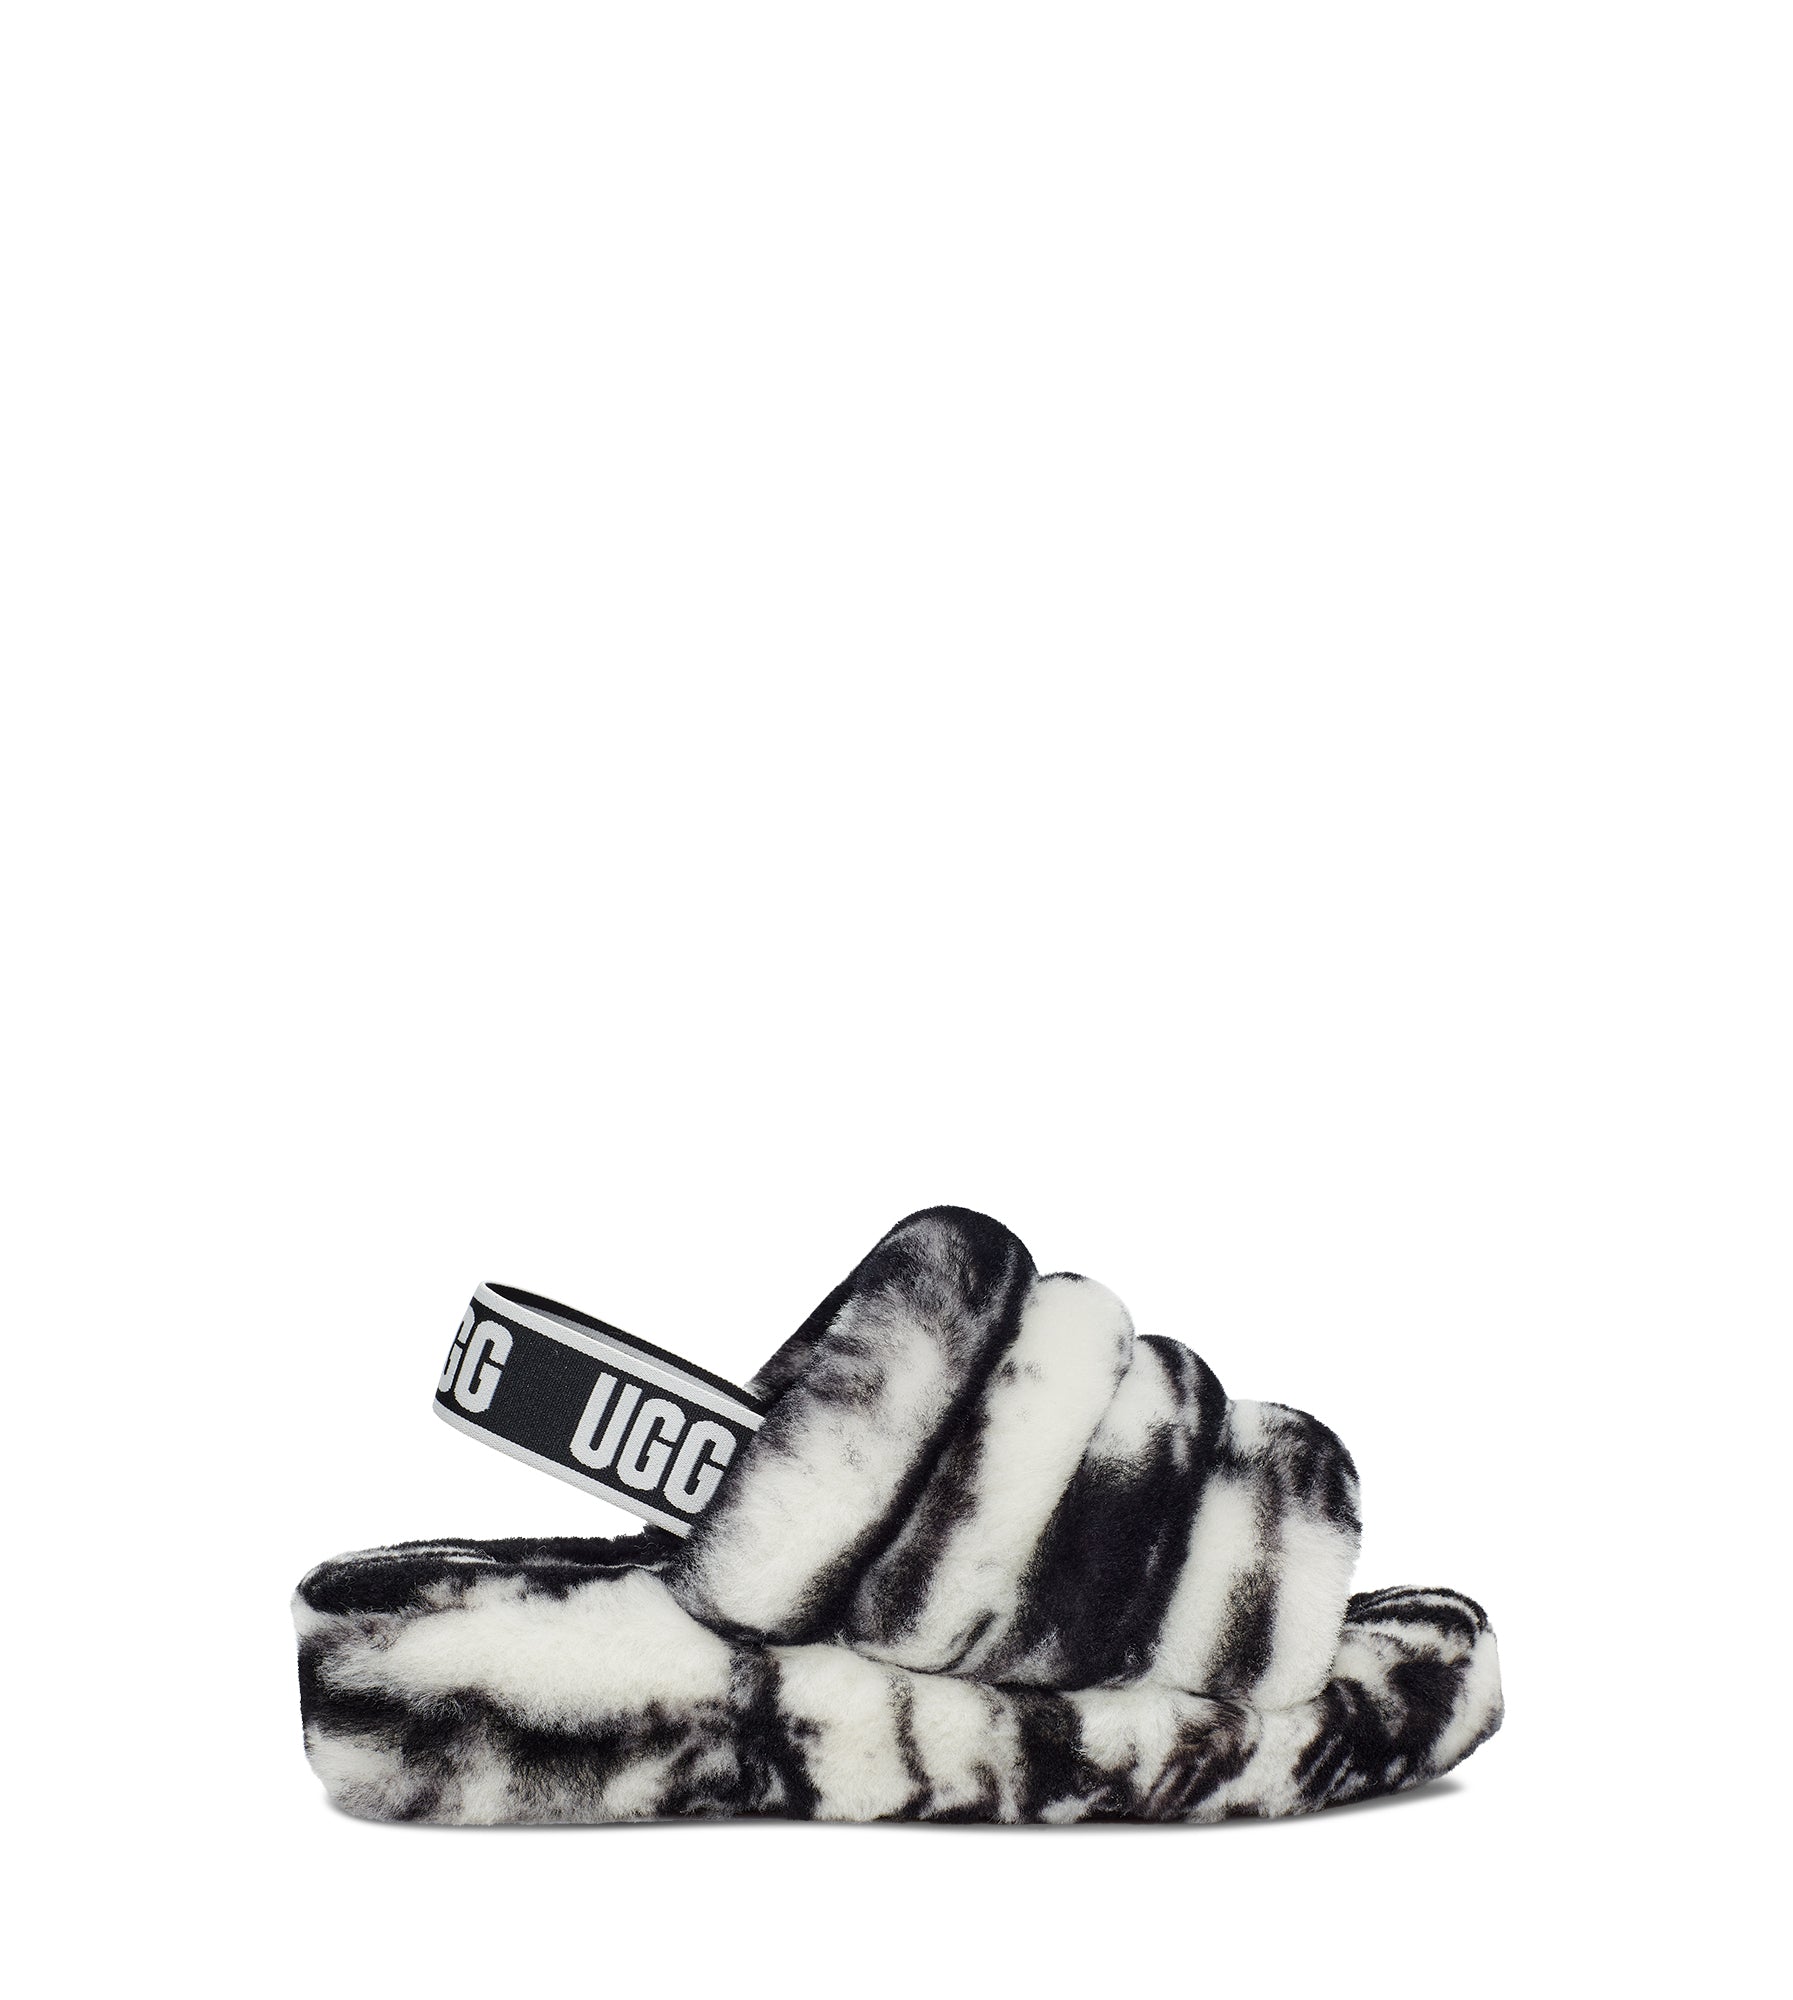 Combining slipper and sandal into a cozy statement shoe, Ugg's Fluff Yeah is as good as it sounds and as soft as it looks. Updated with multicolor fluff that blends together as seamlessly as the colorful Californian landscape, it features plush, marble-print sheepskin on a lightweight platform to keep things airy. 